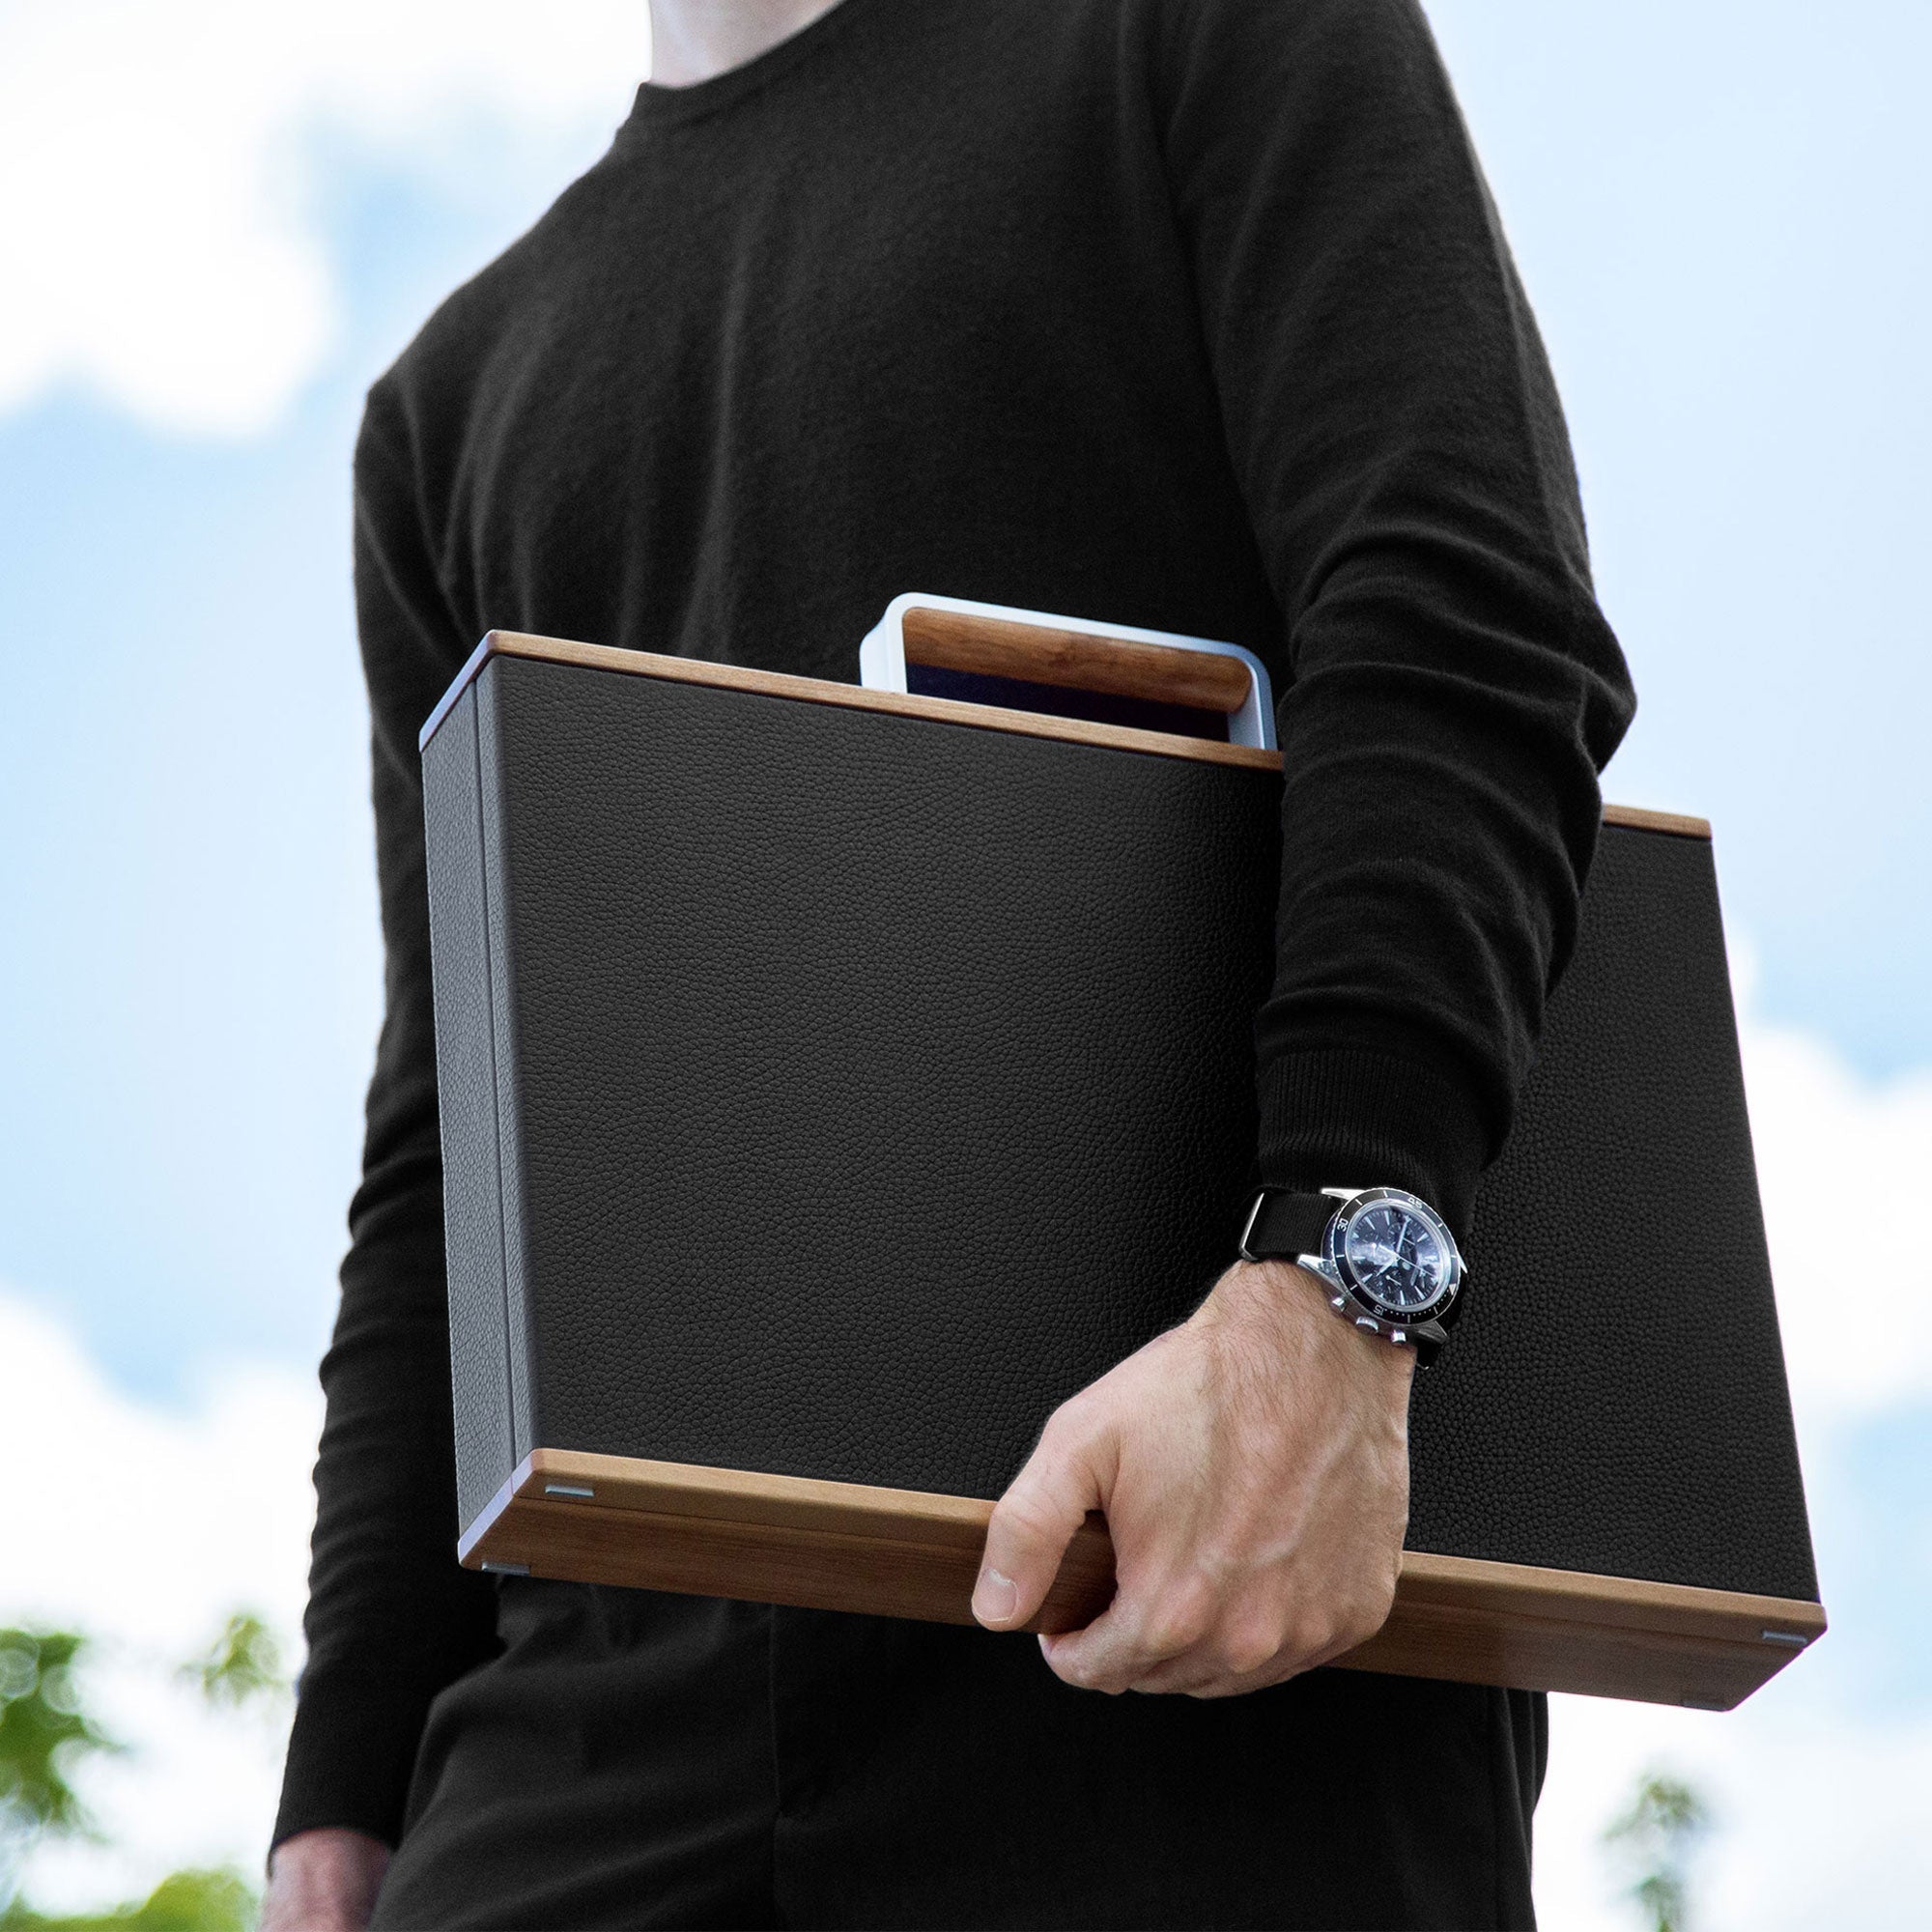 Lifestyle shot of man wearing luxury watch holding elegant Mackenzie watch briefcase with wood accents